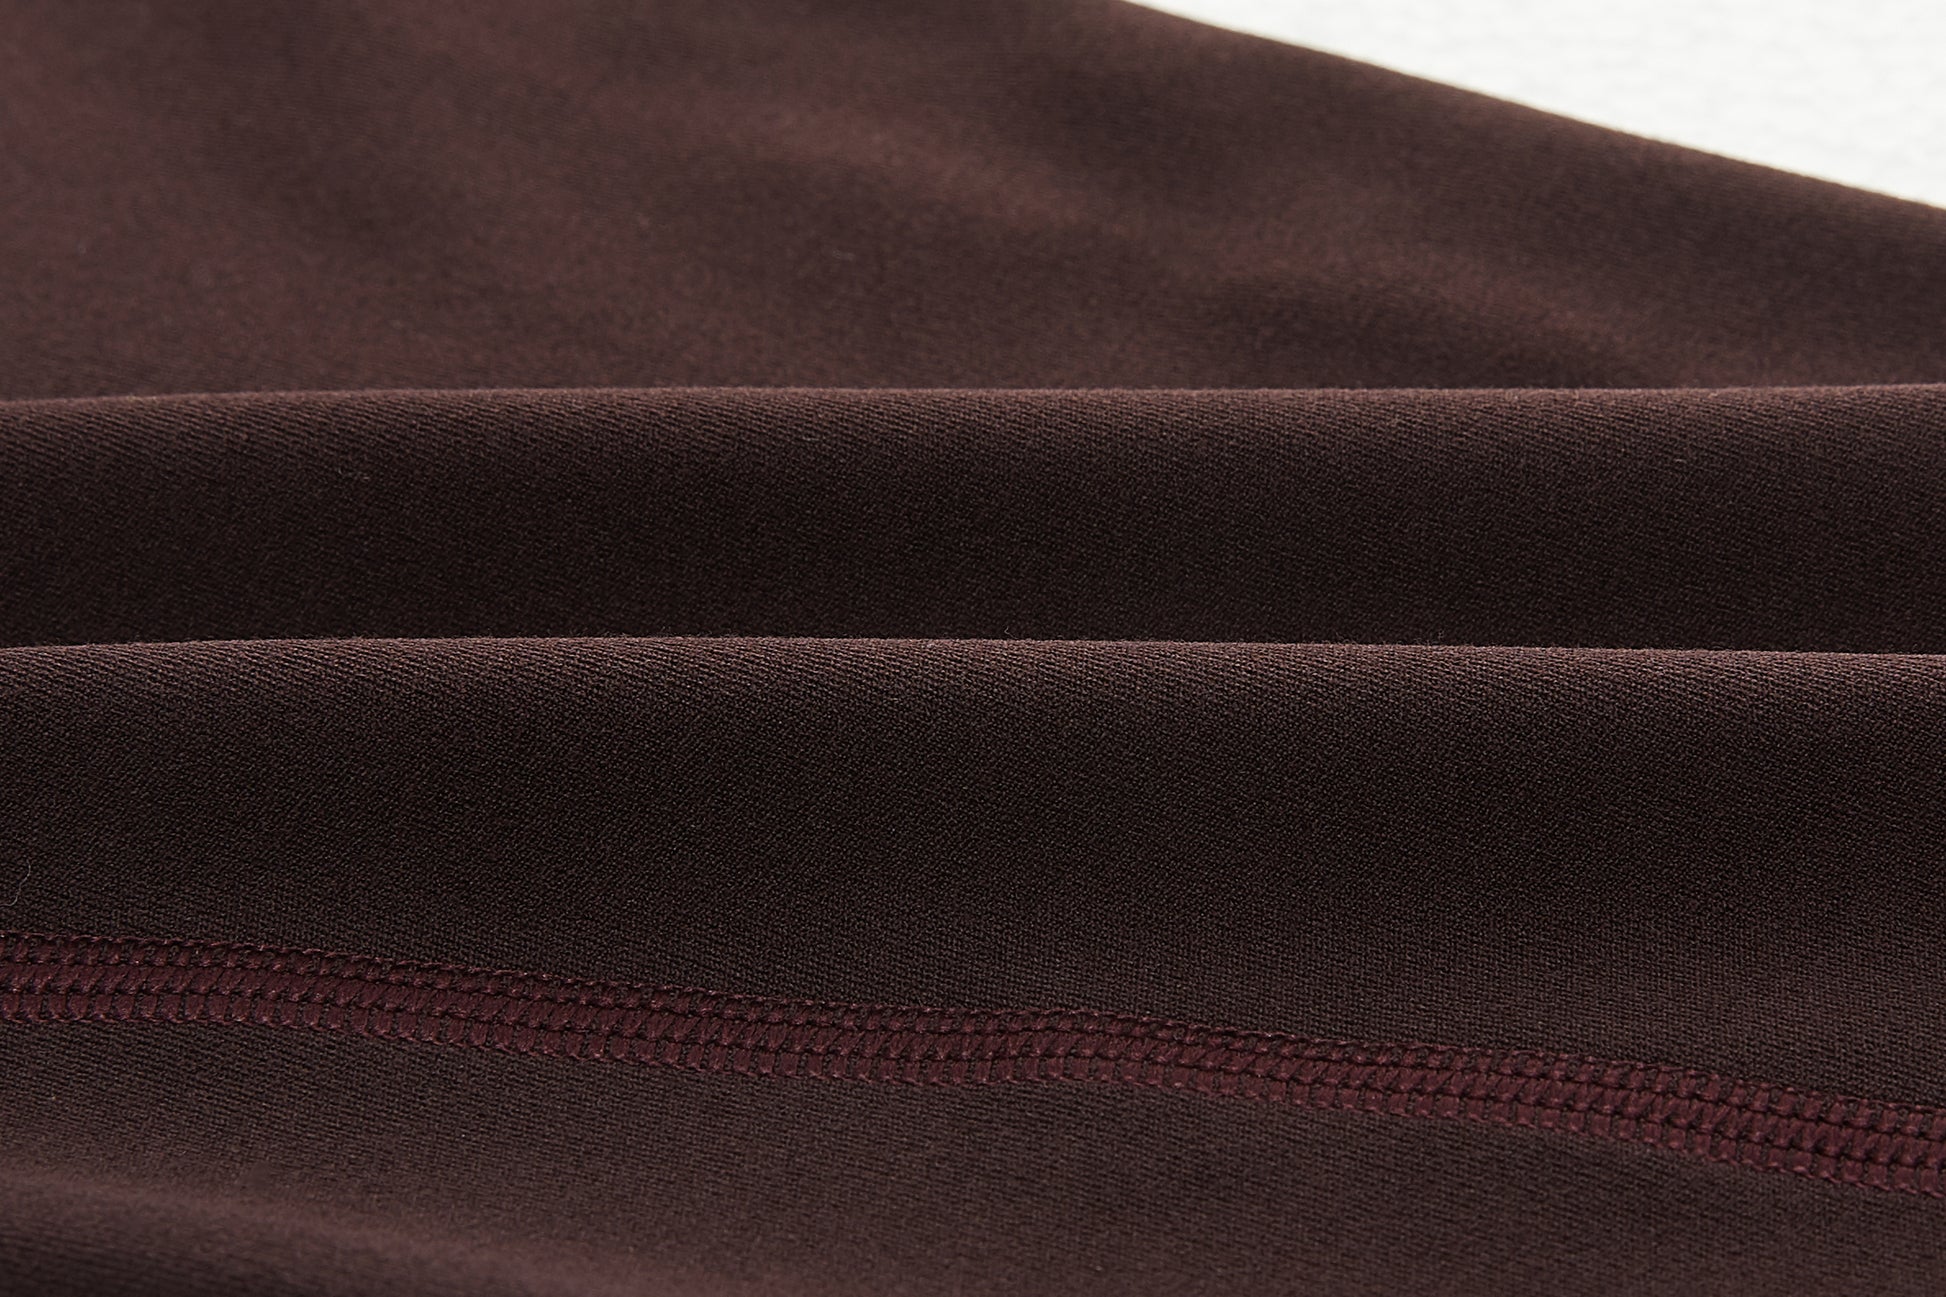 close up of the brown legging fabric